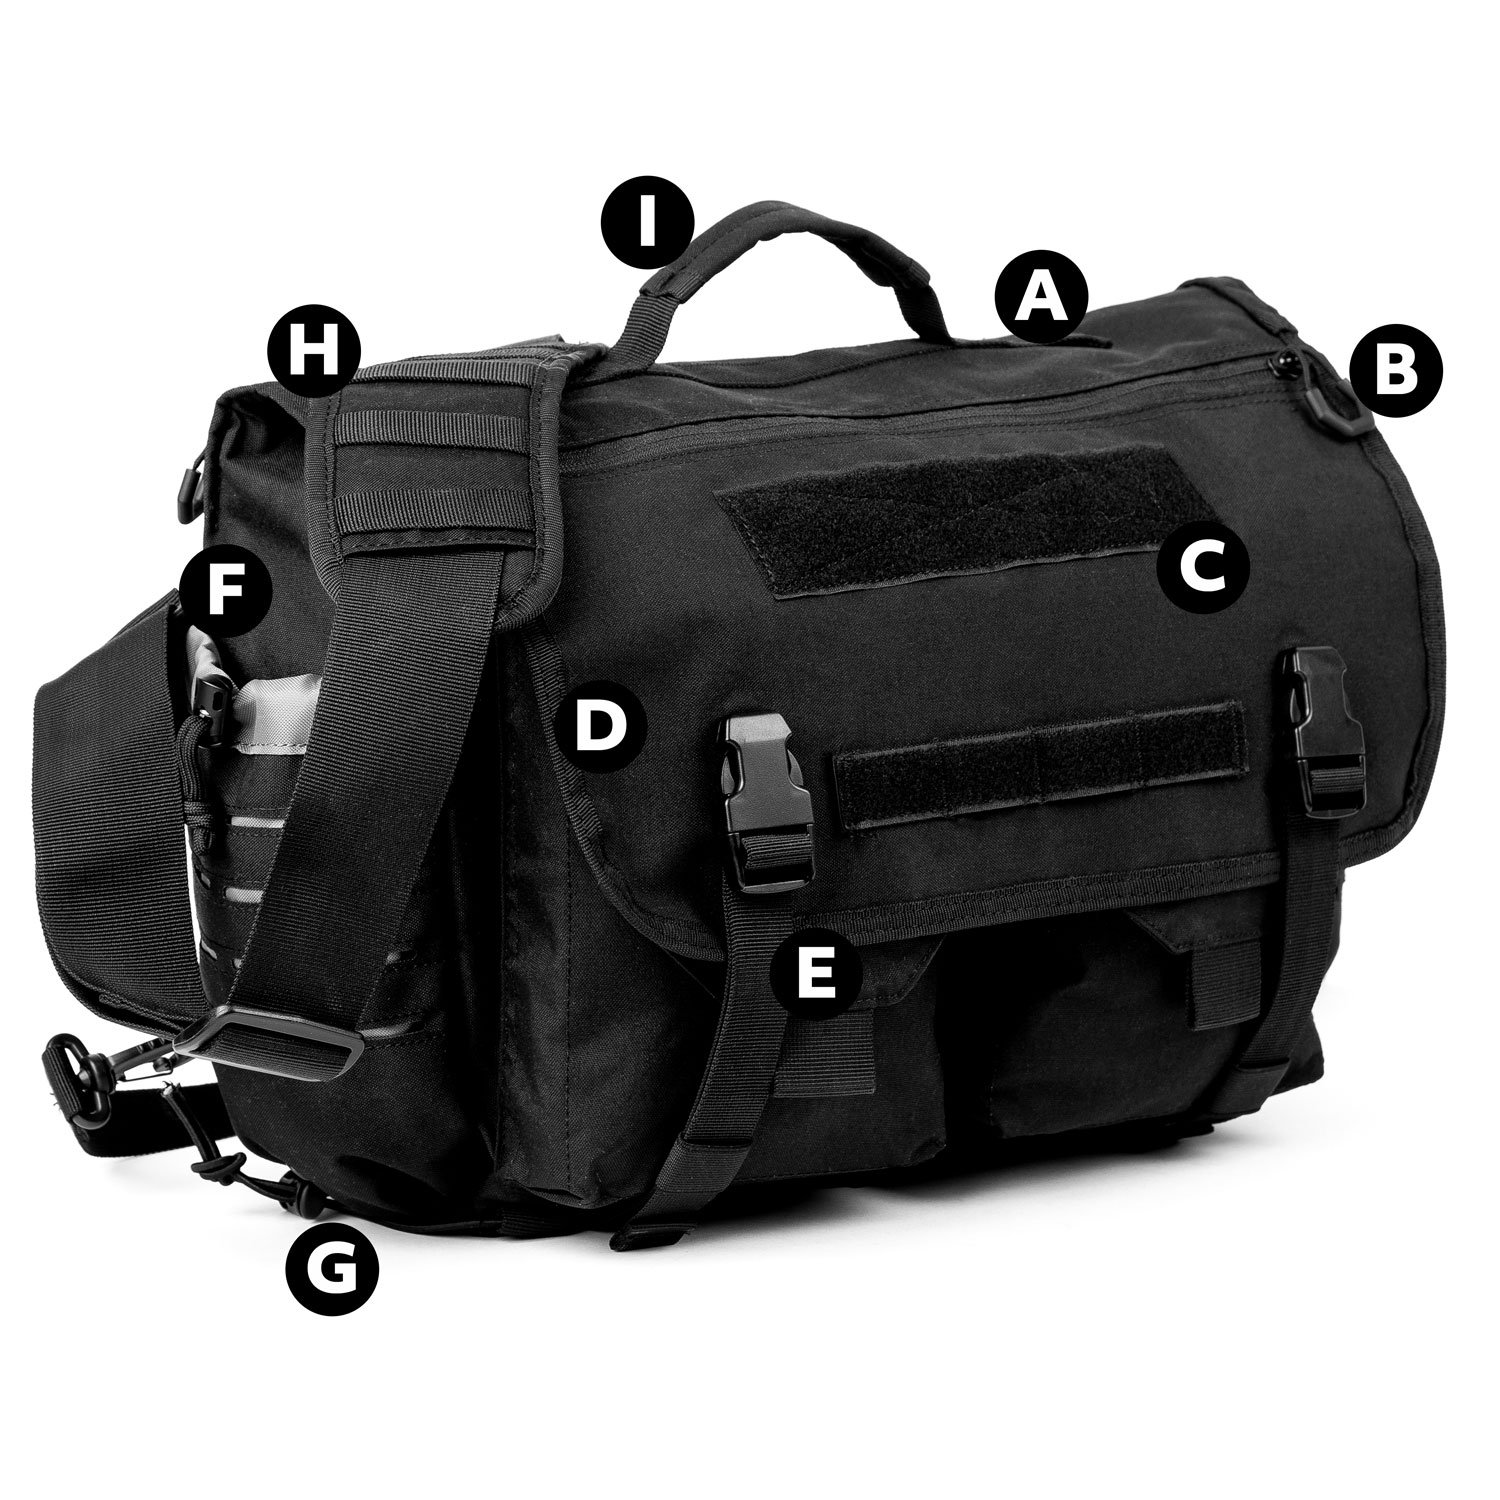 3V Gear Shield Anti-Theft Backpack